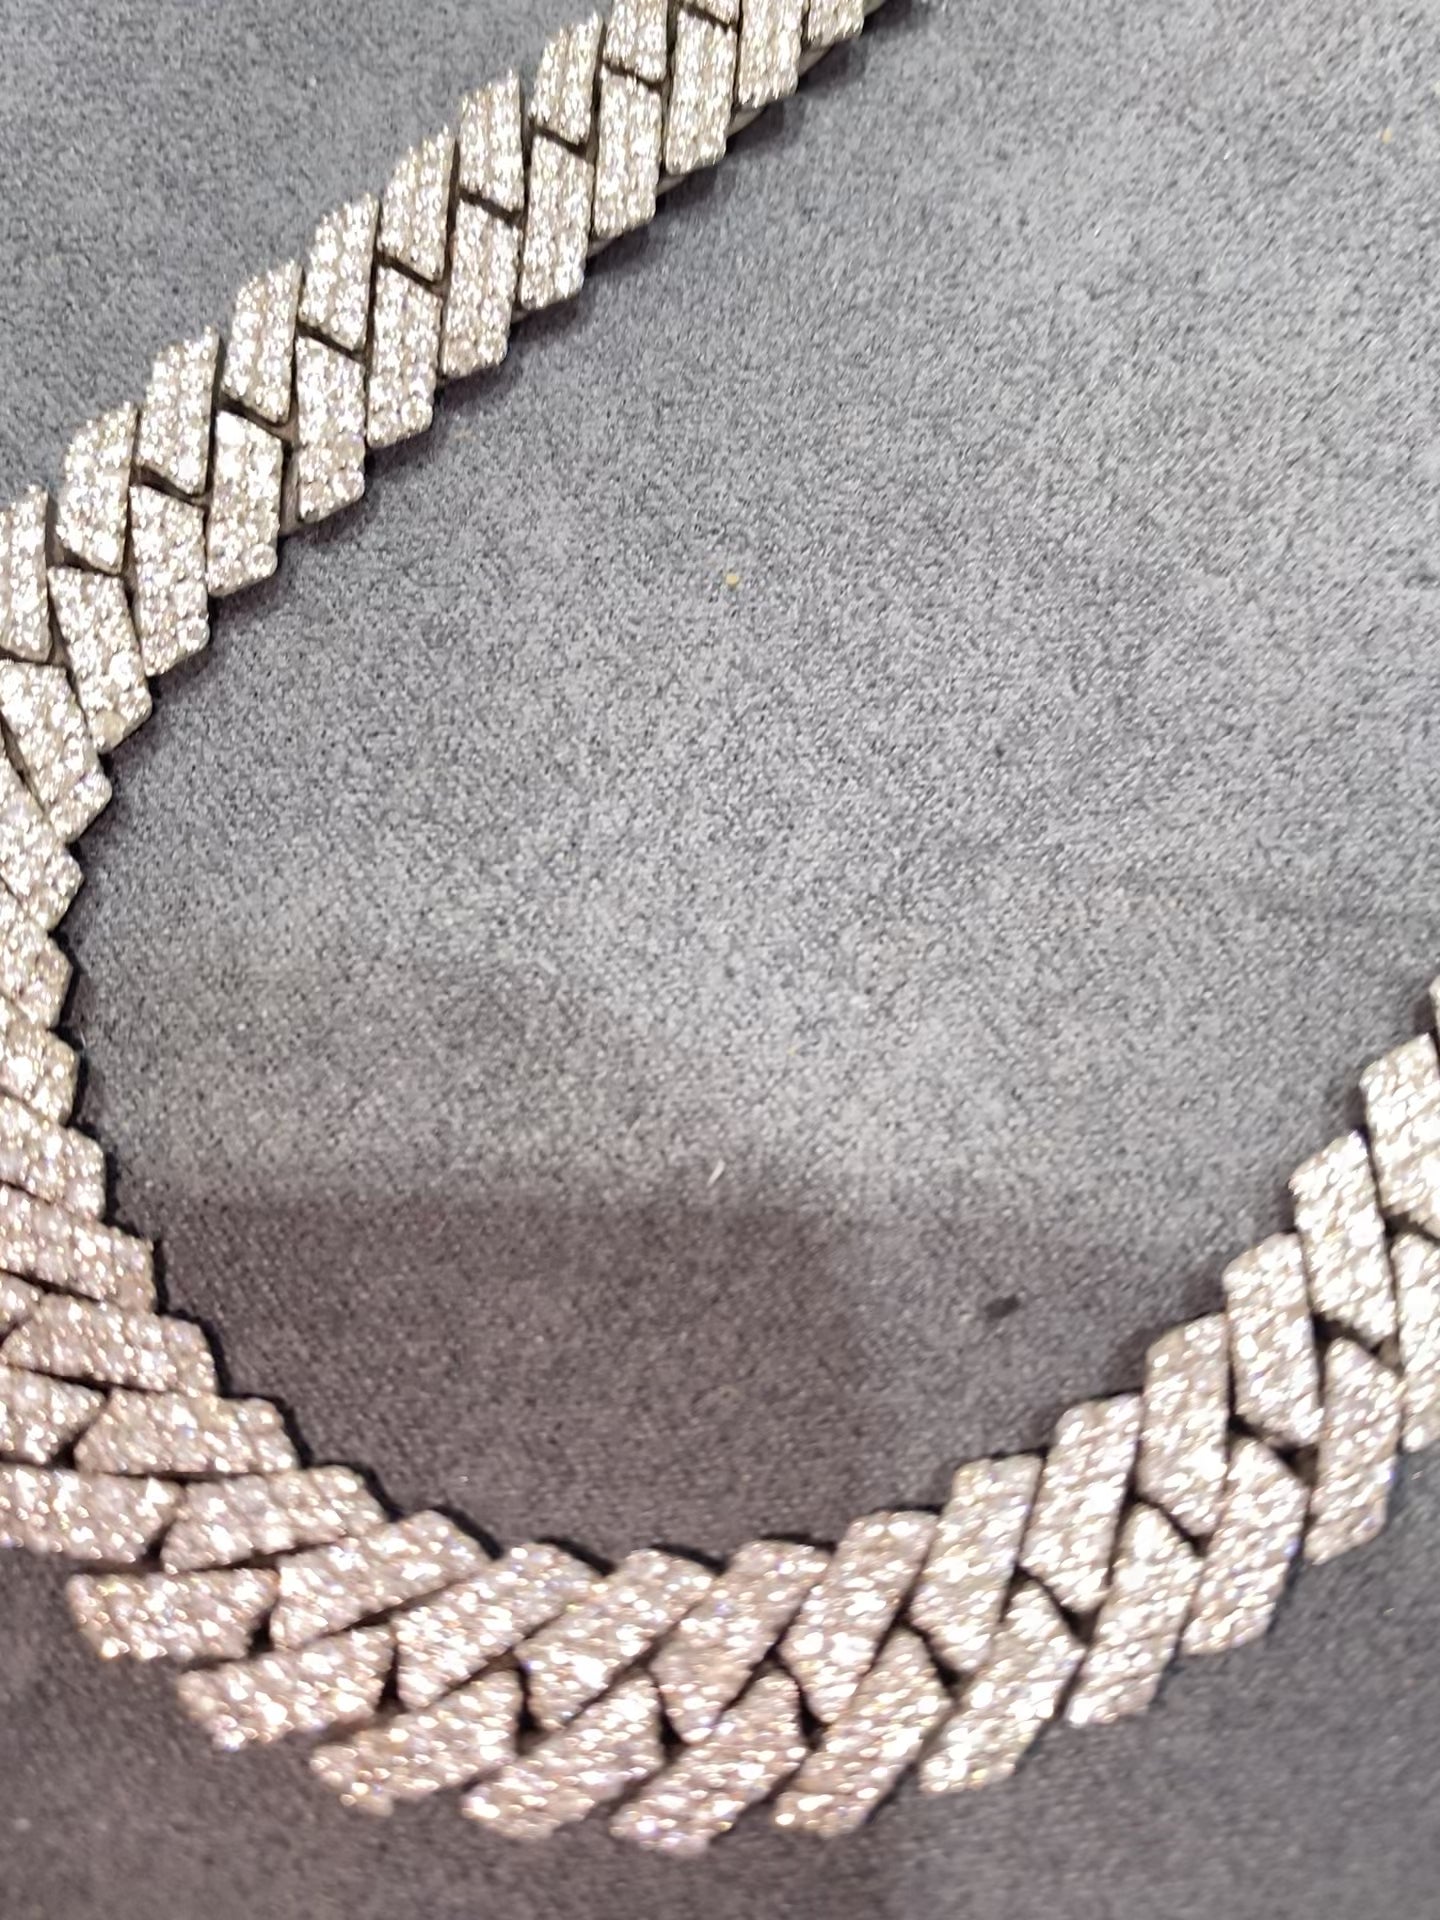 New ICED 14k WHITE GOLD MIAMI CUBAN NECKLACE Vs1 24.cts.t.w. NATURAL DIAMONDS